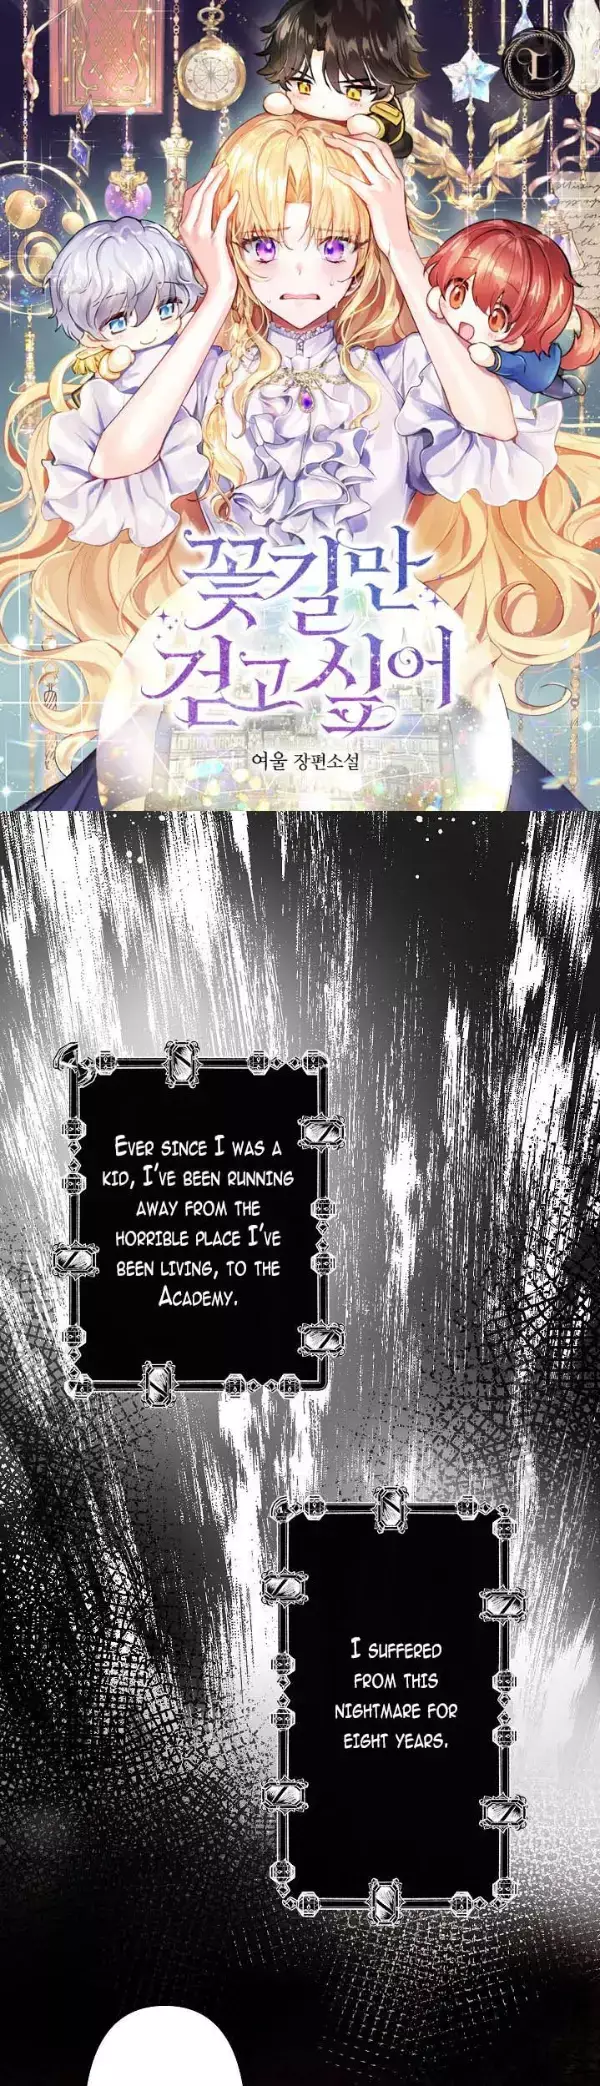 I Just Want To Walk On The Flower Road - 0 page 1